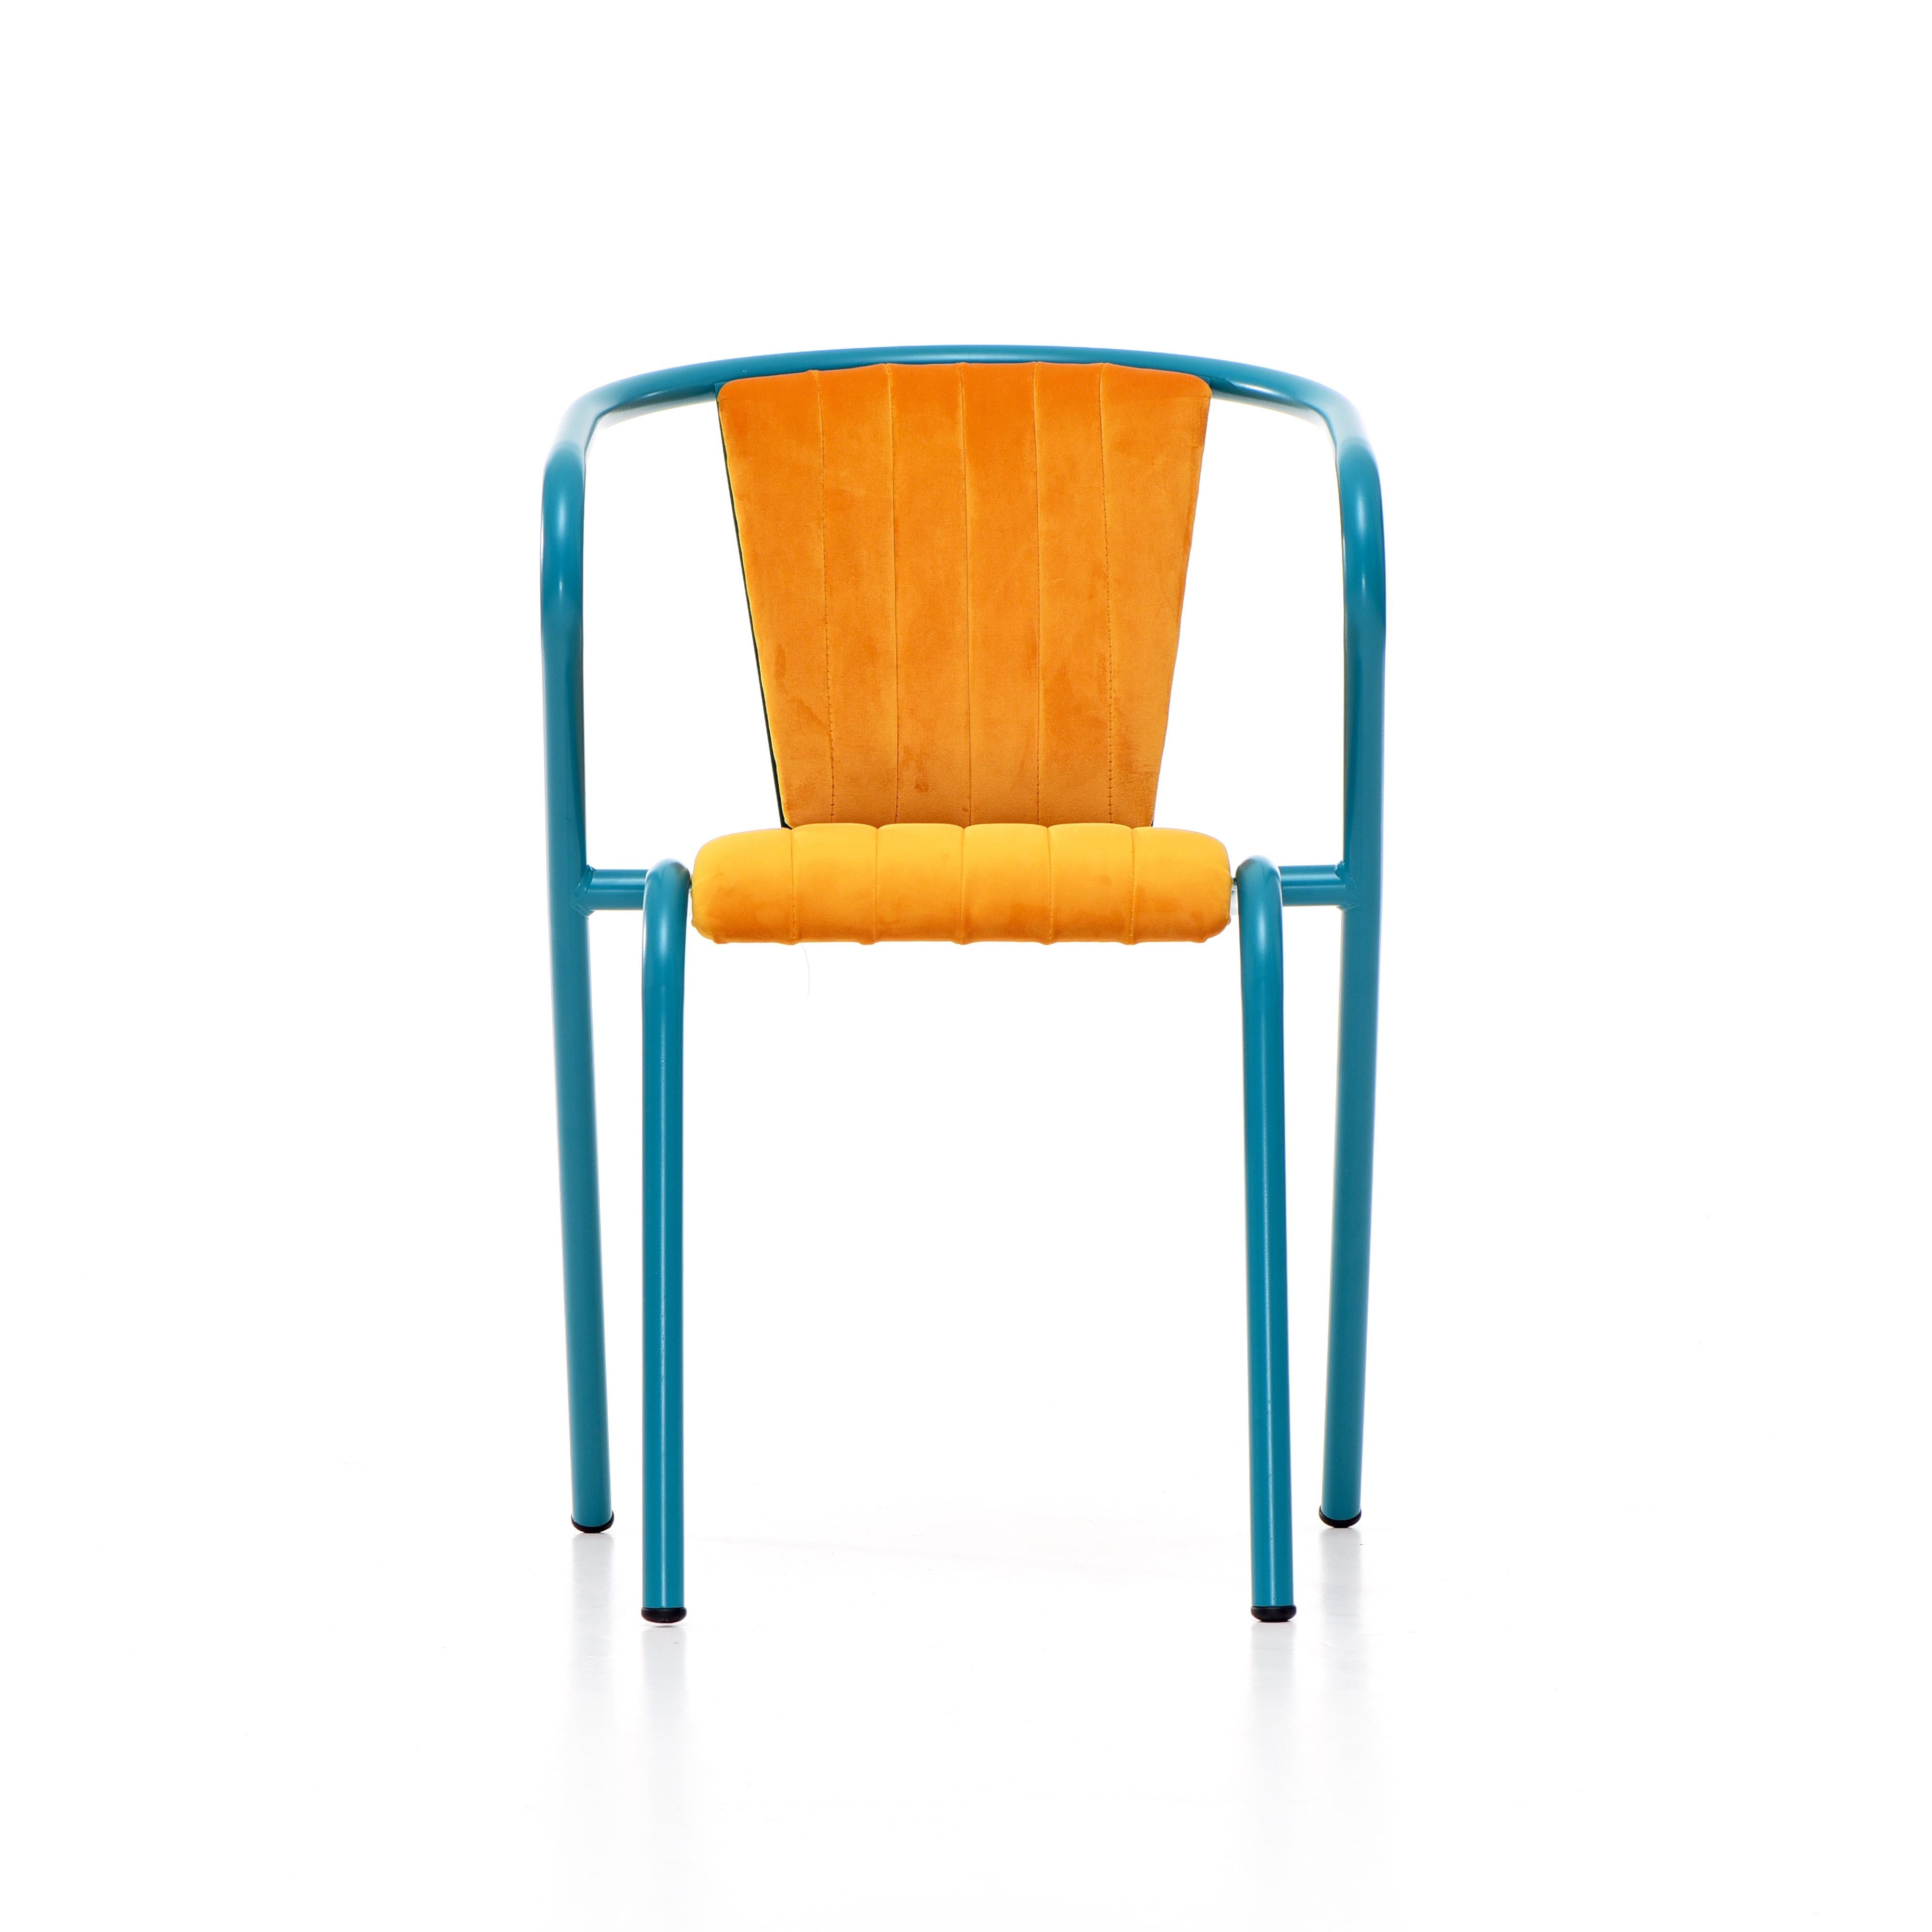 BICAchair is a stackable steel dining armchair made from recycled and recyclable steel, finished with our premium selection of powder-coating colors, in this case in rich blue color, that transforms a Classic in something new and vibrant. The